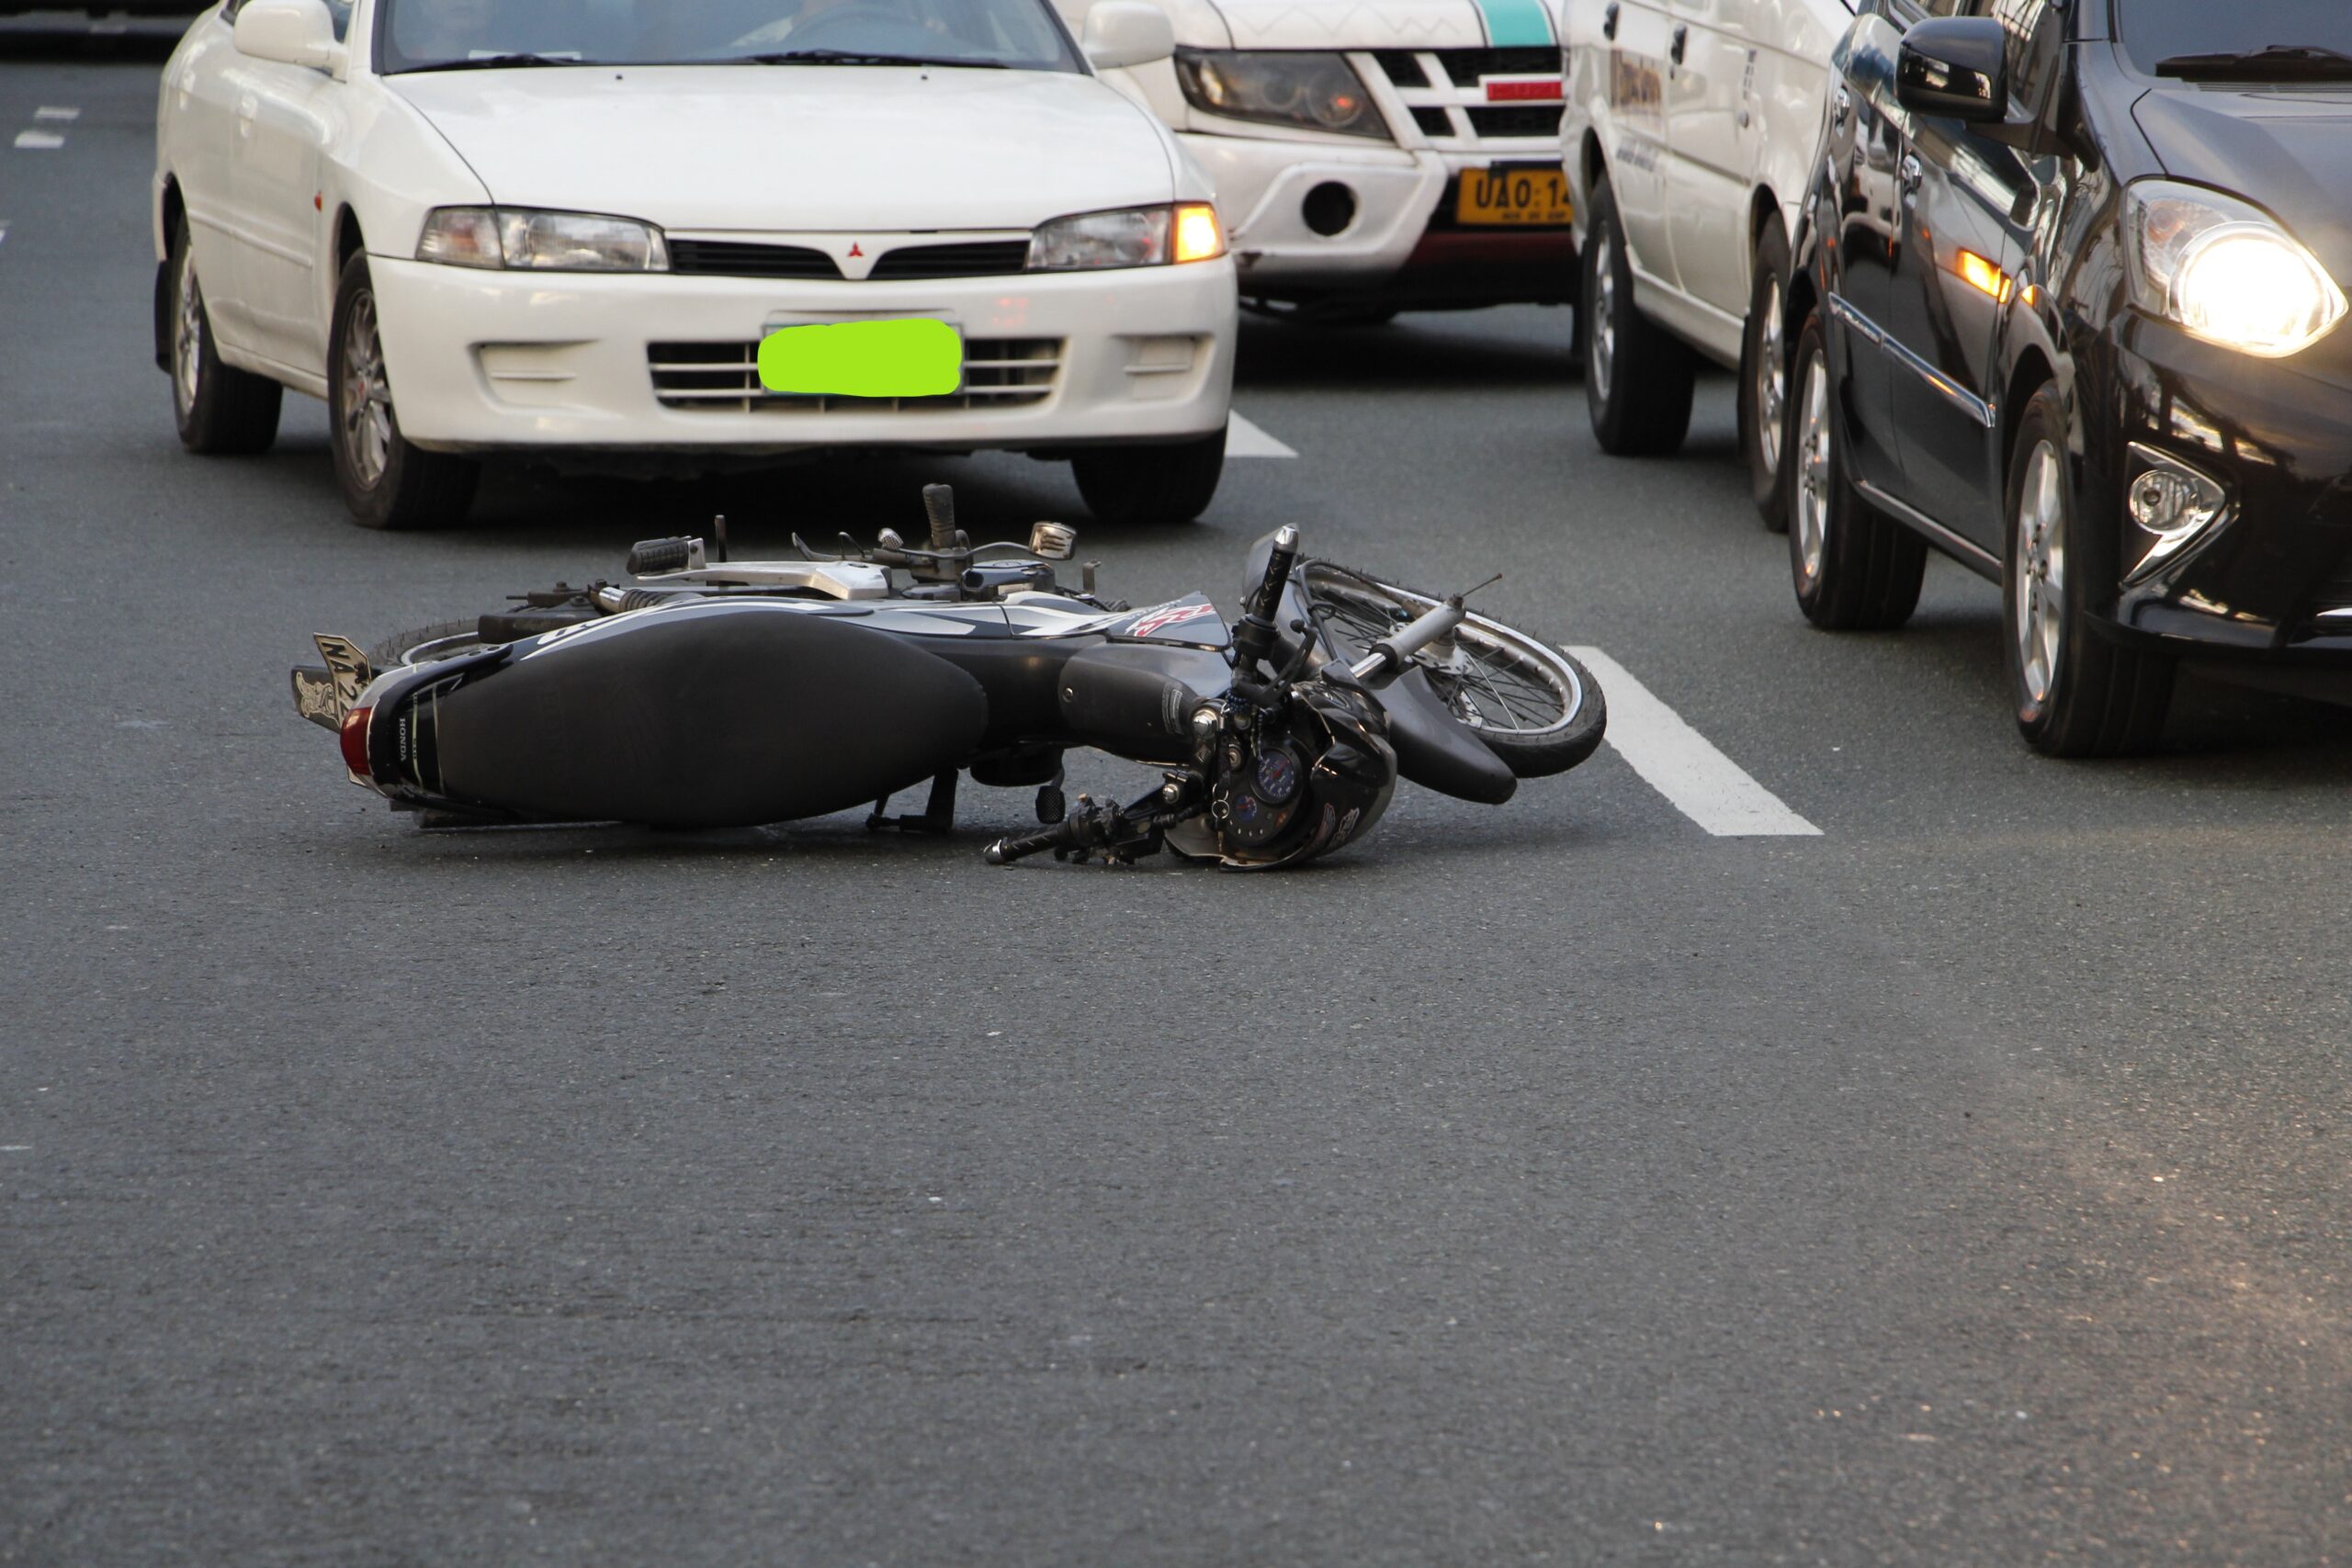 Motorcycle lying on the road after an accident image